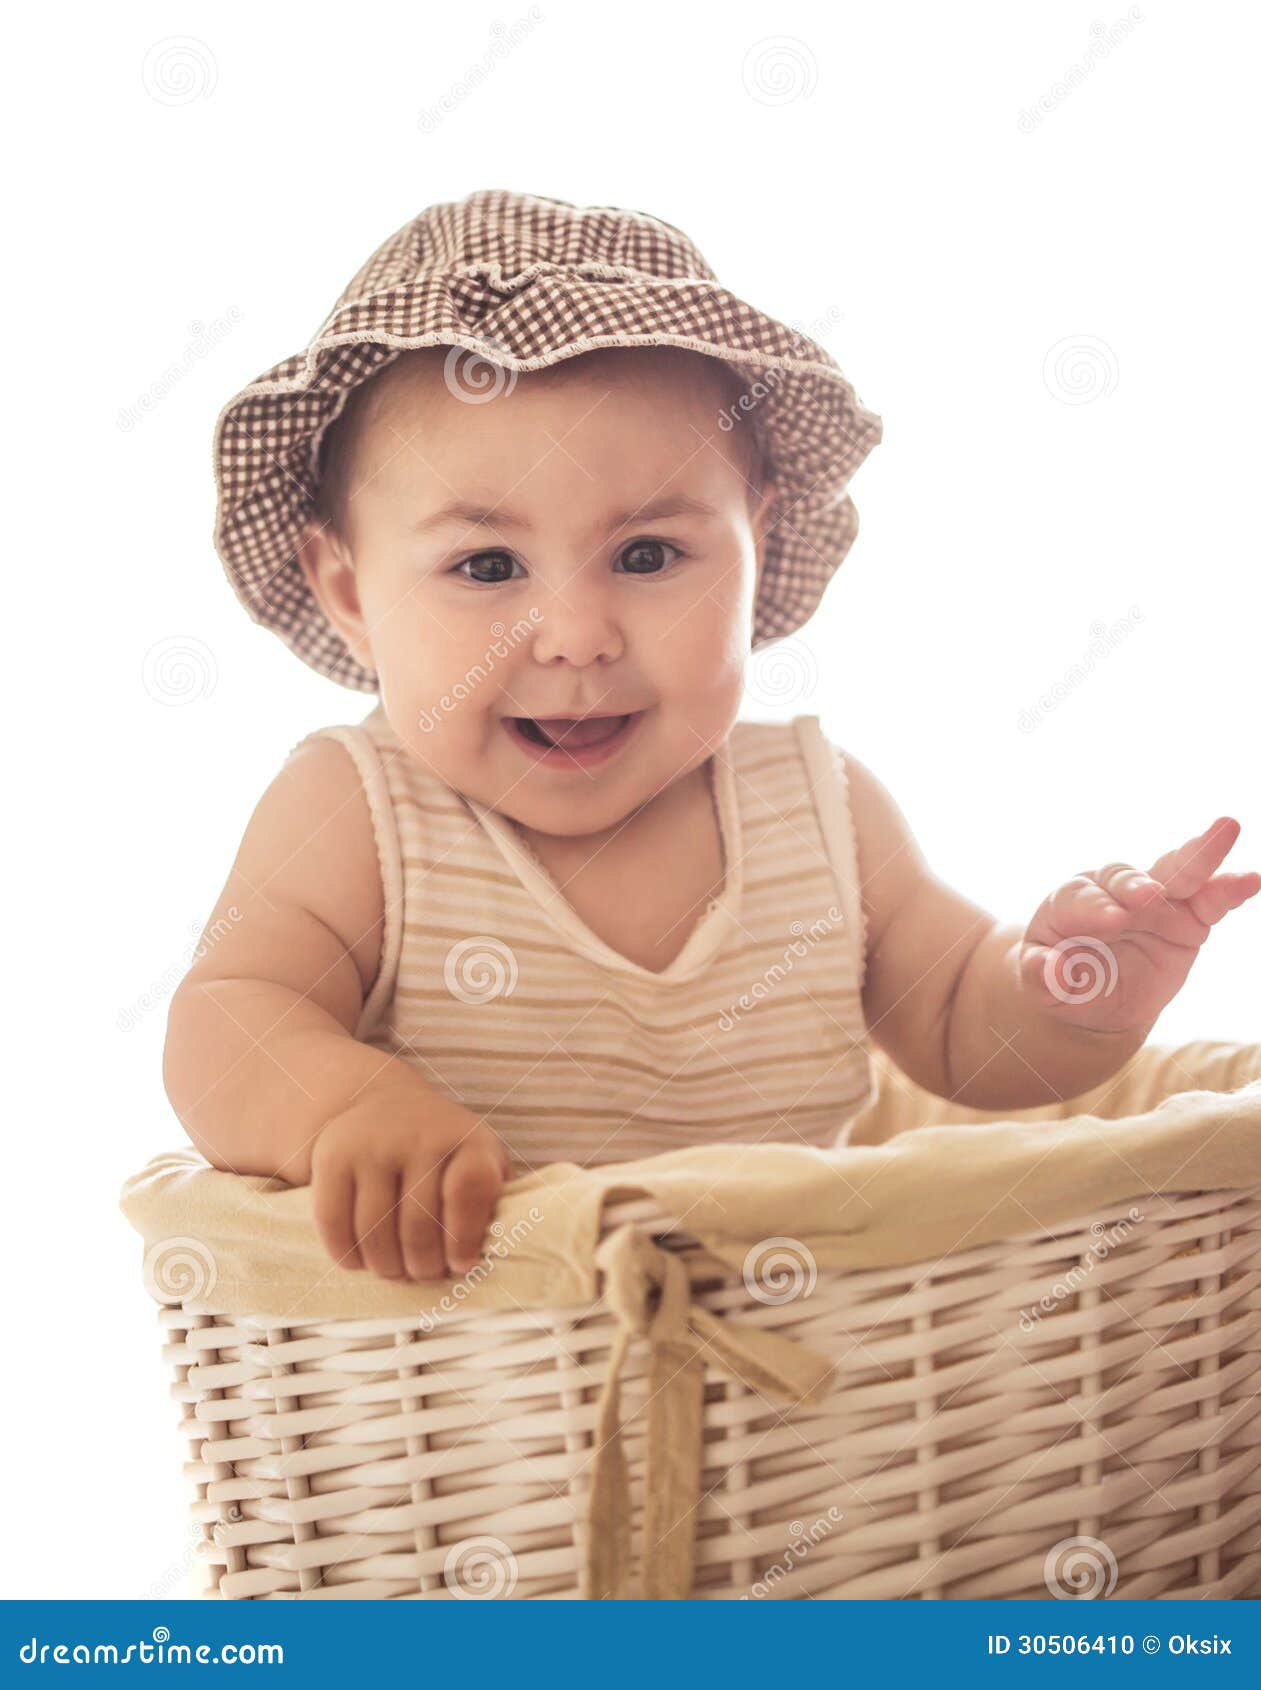 Eight month baby in basket stock photo. Image of month - 30506410